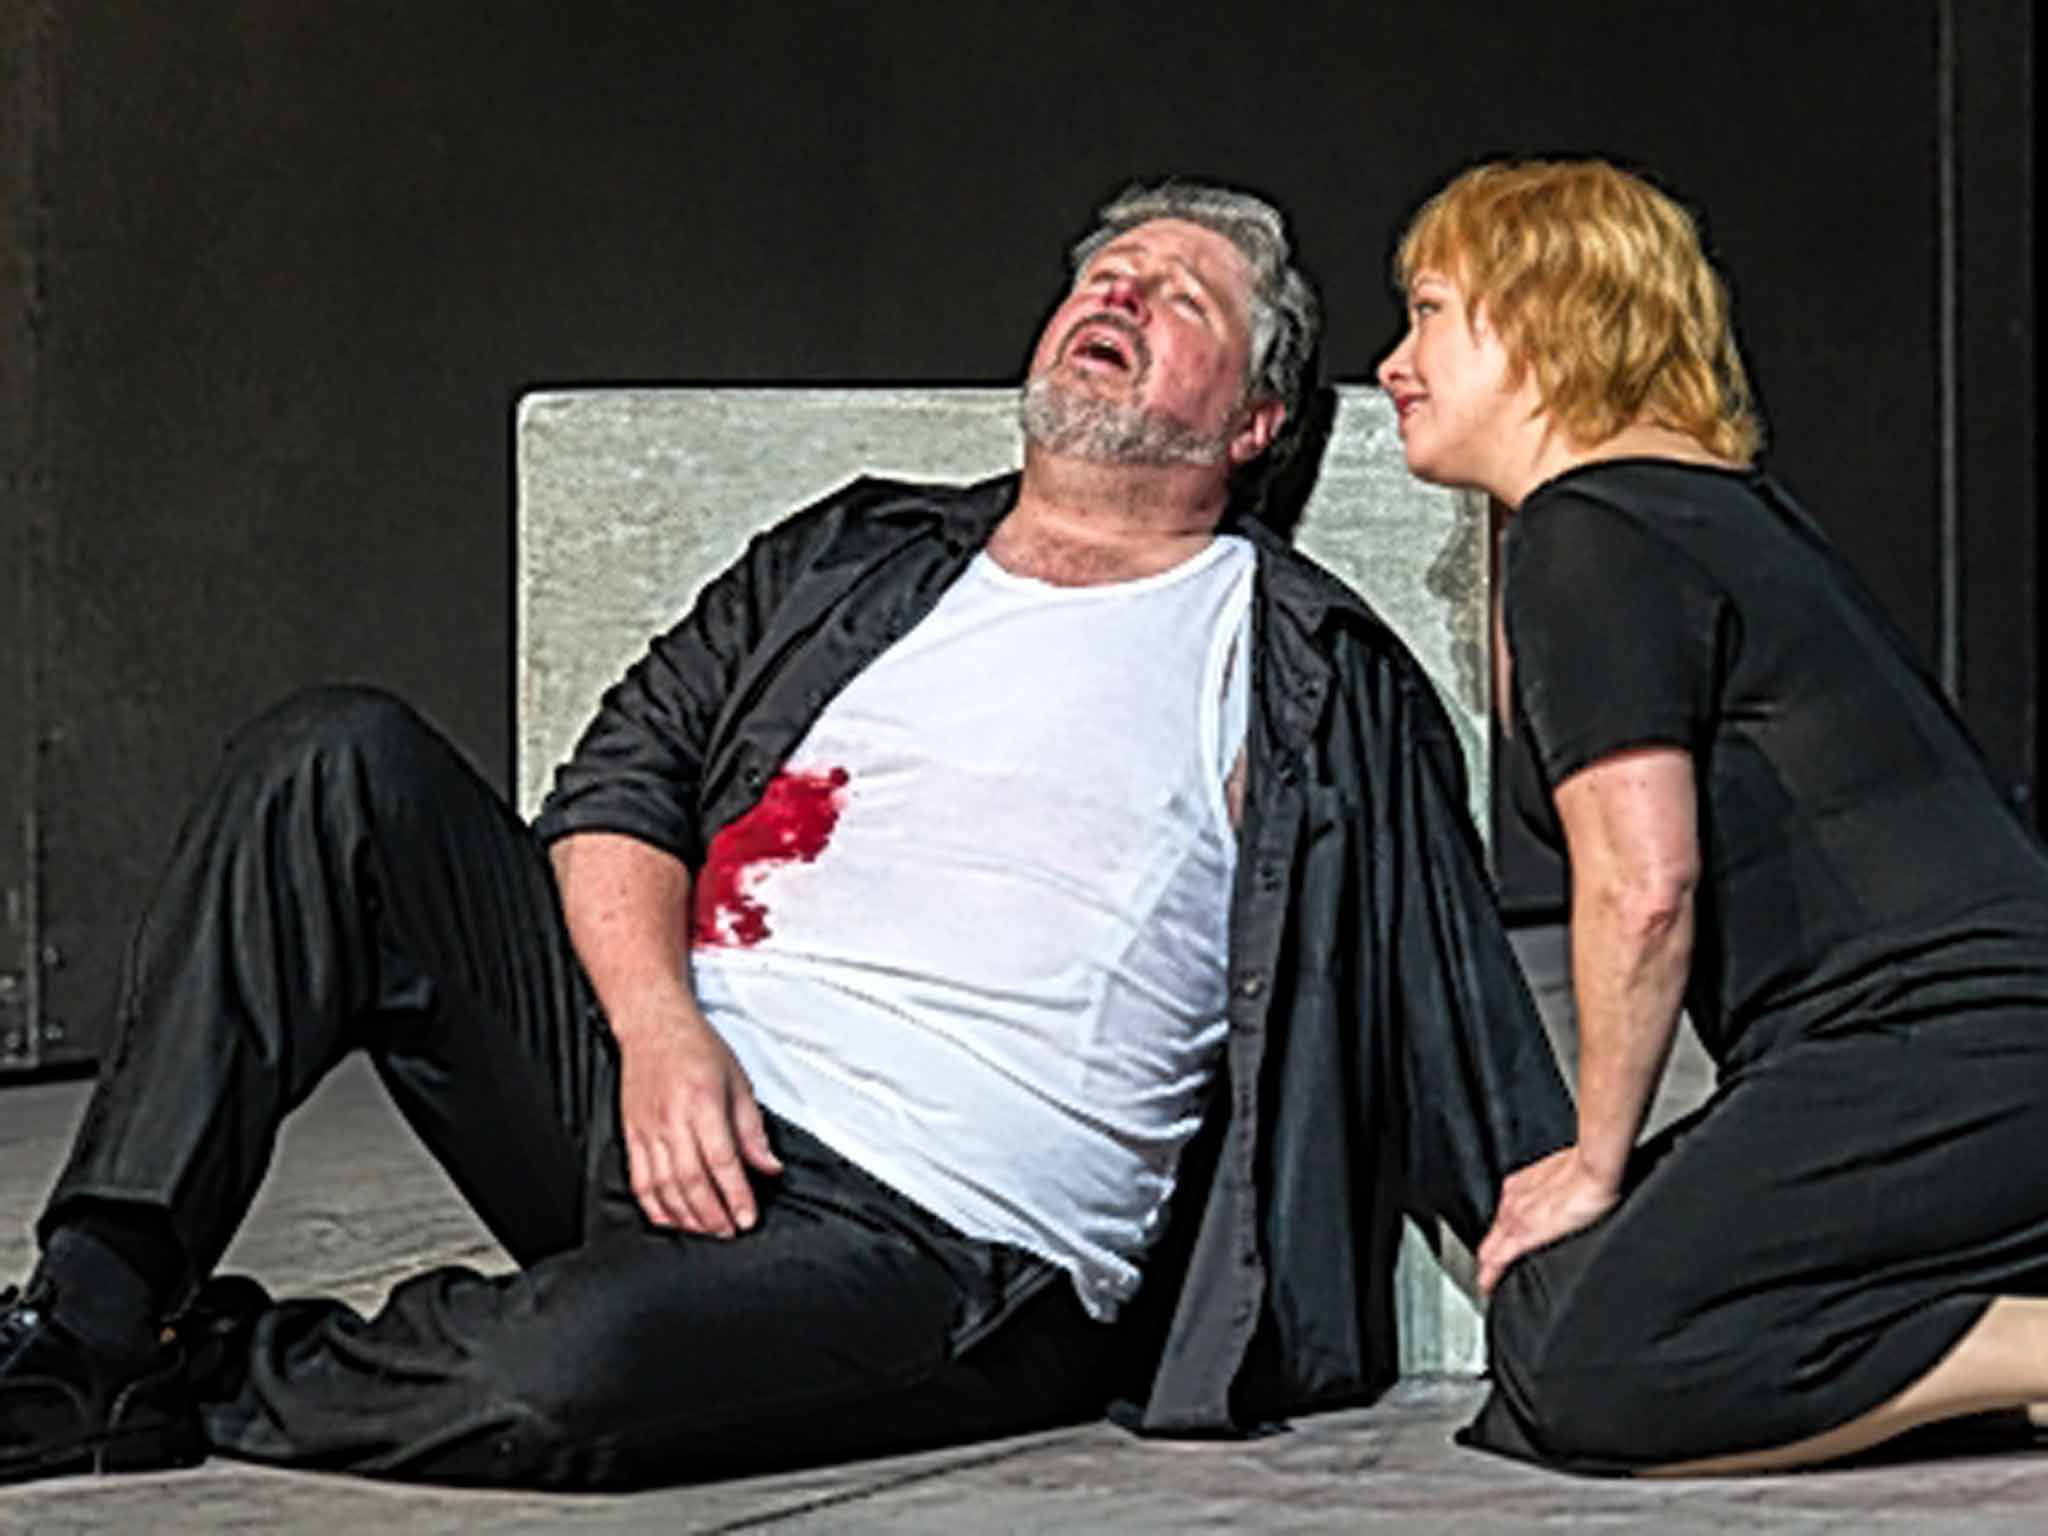 Blood and thunder: Stephen Gould as Tristan and Nina Stemme as Isolde